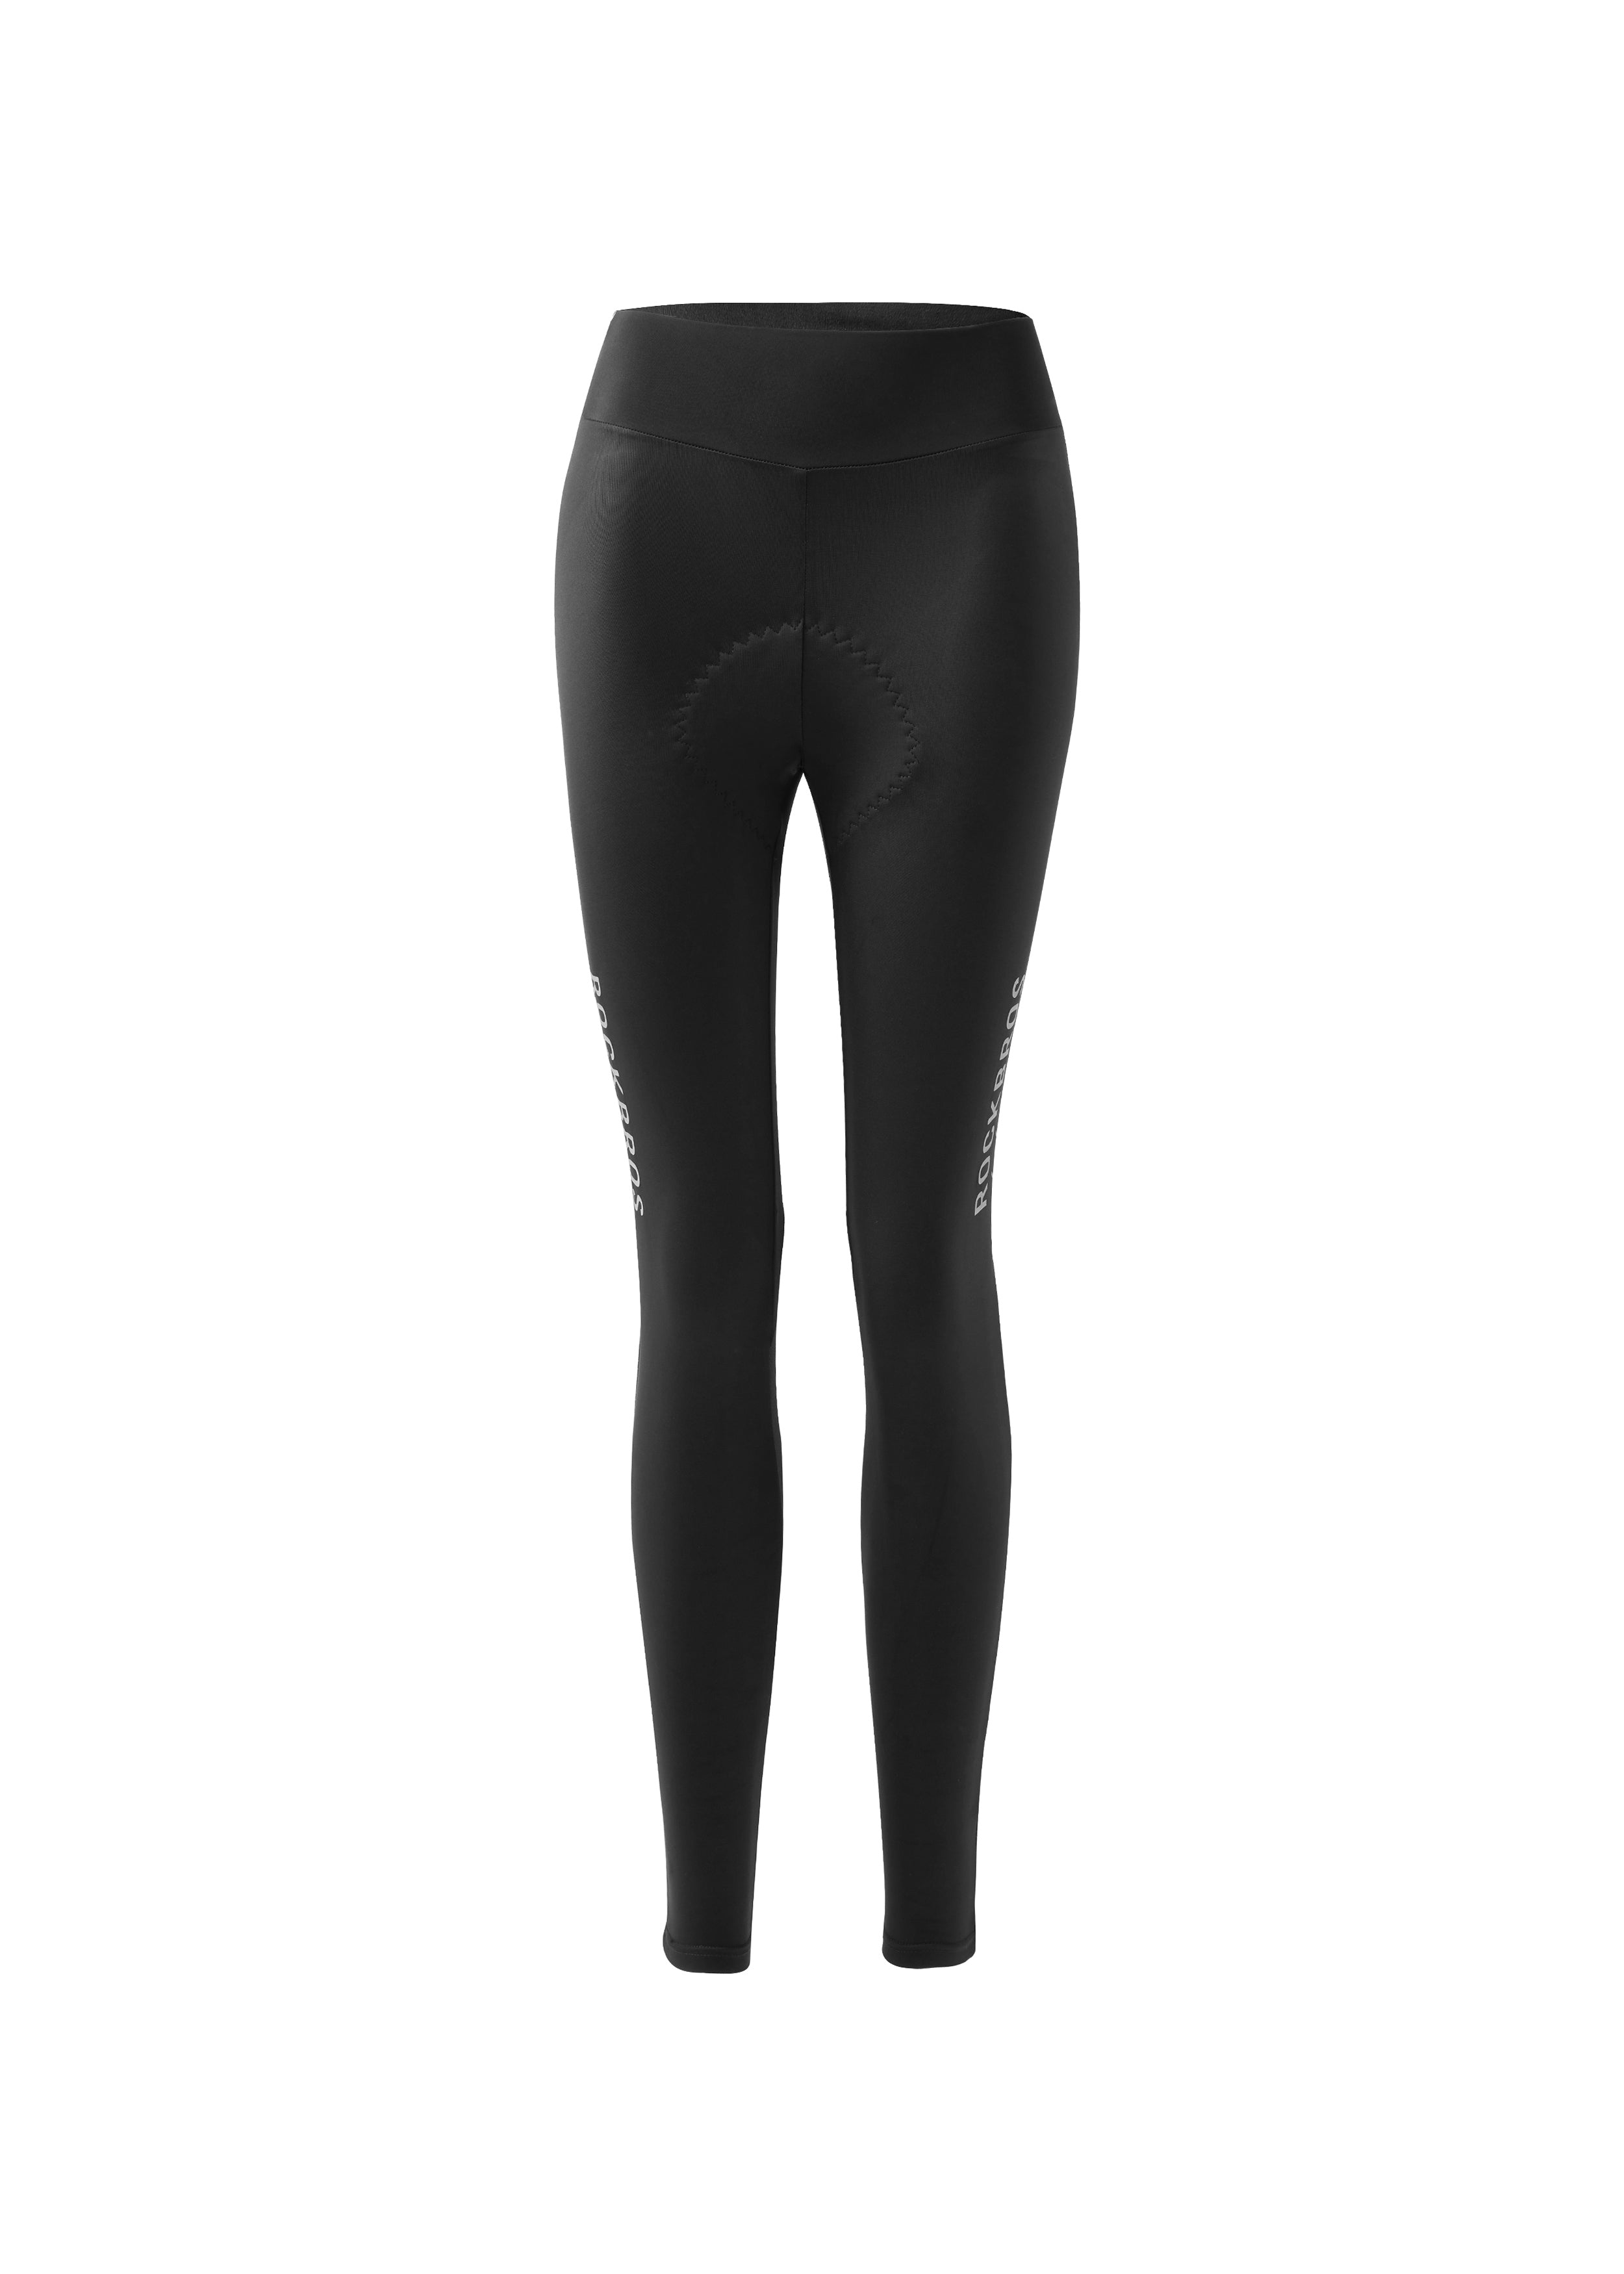 Image of ROCKBROS Women's Cycling Trousers-road to sky